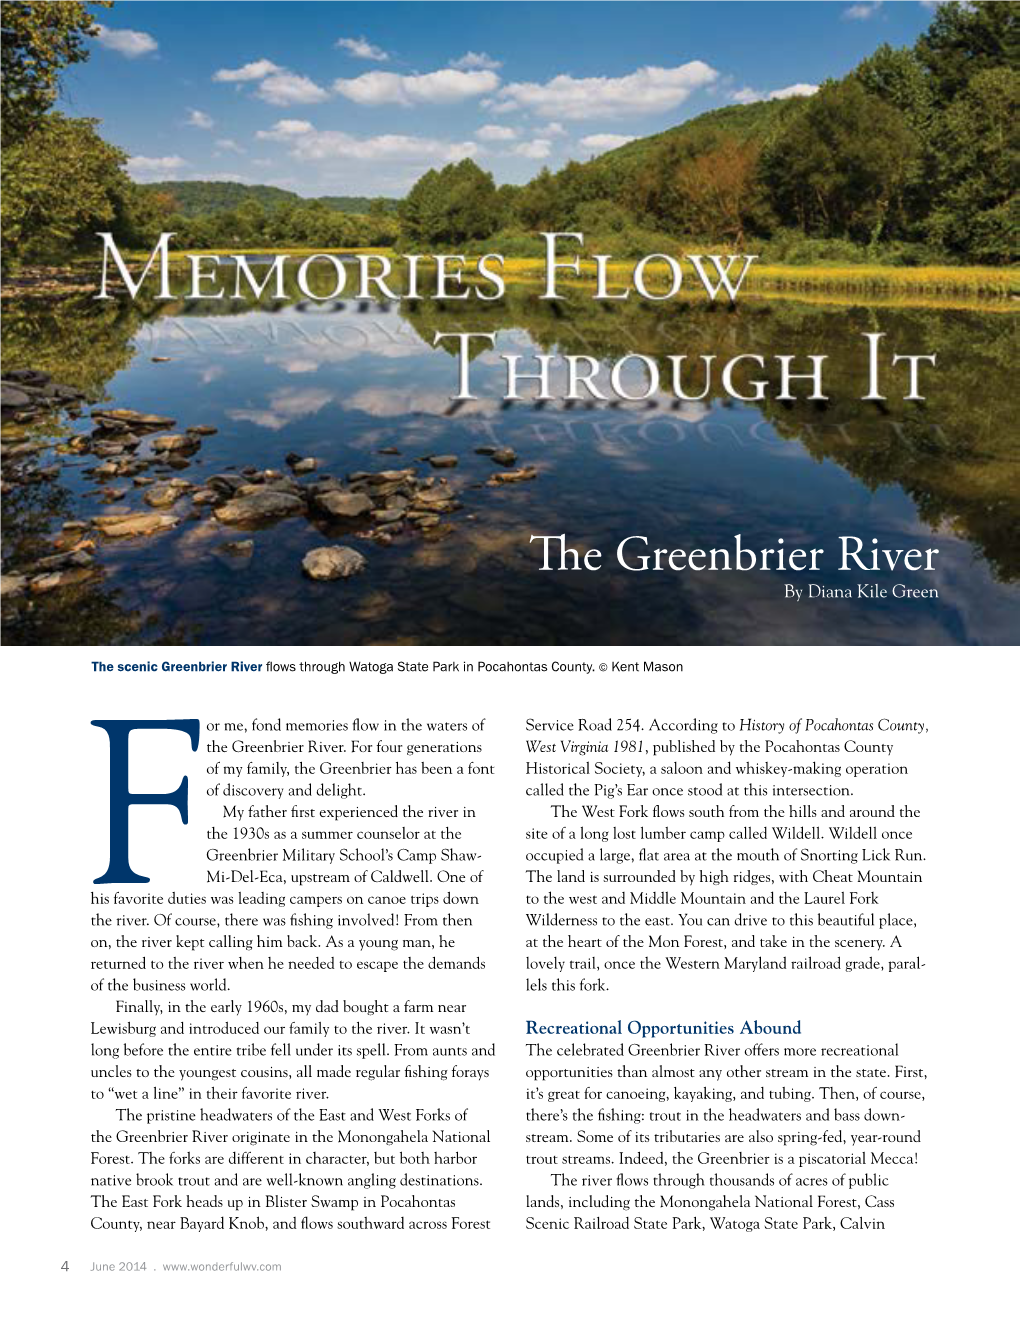 The Greenbrier River by Diana Kile Green